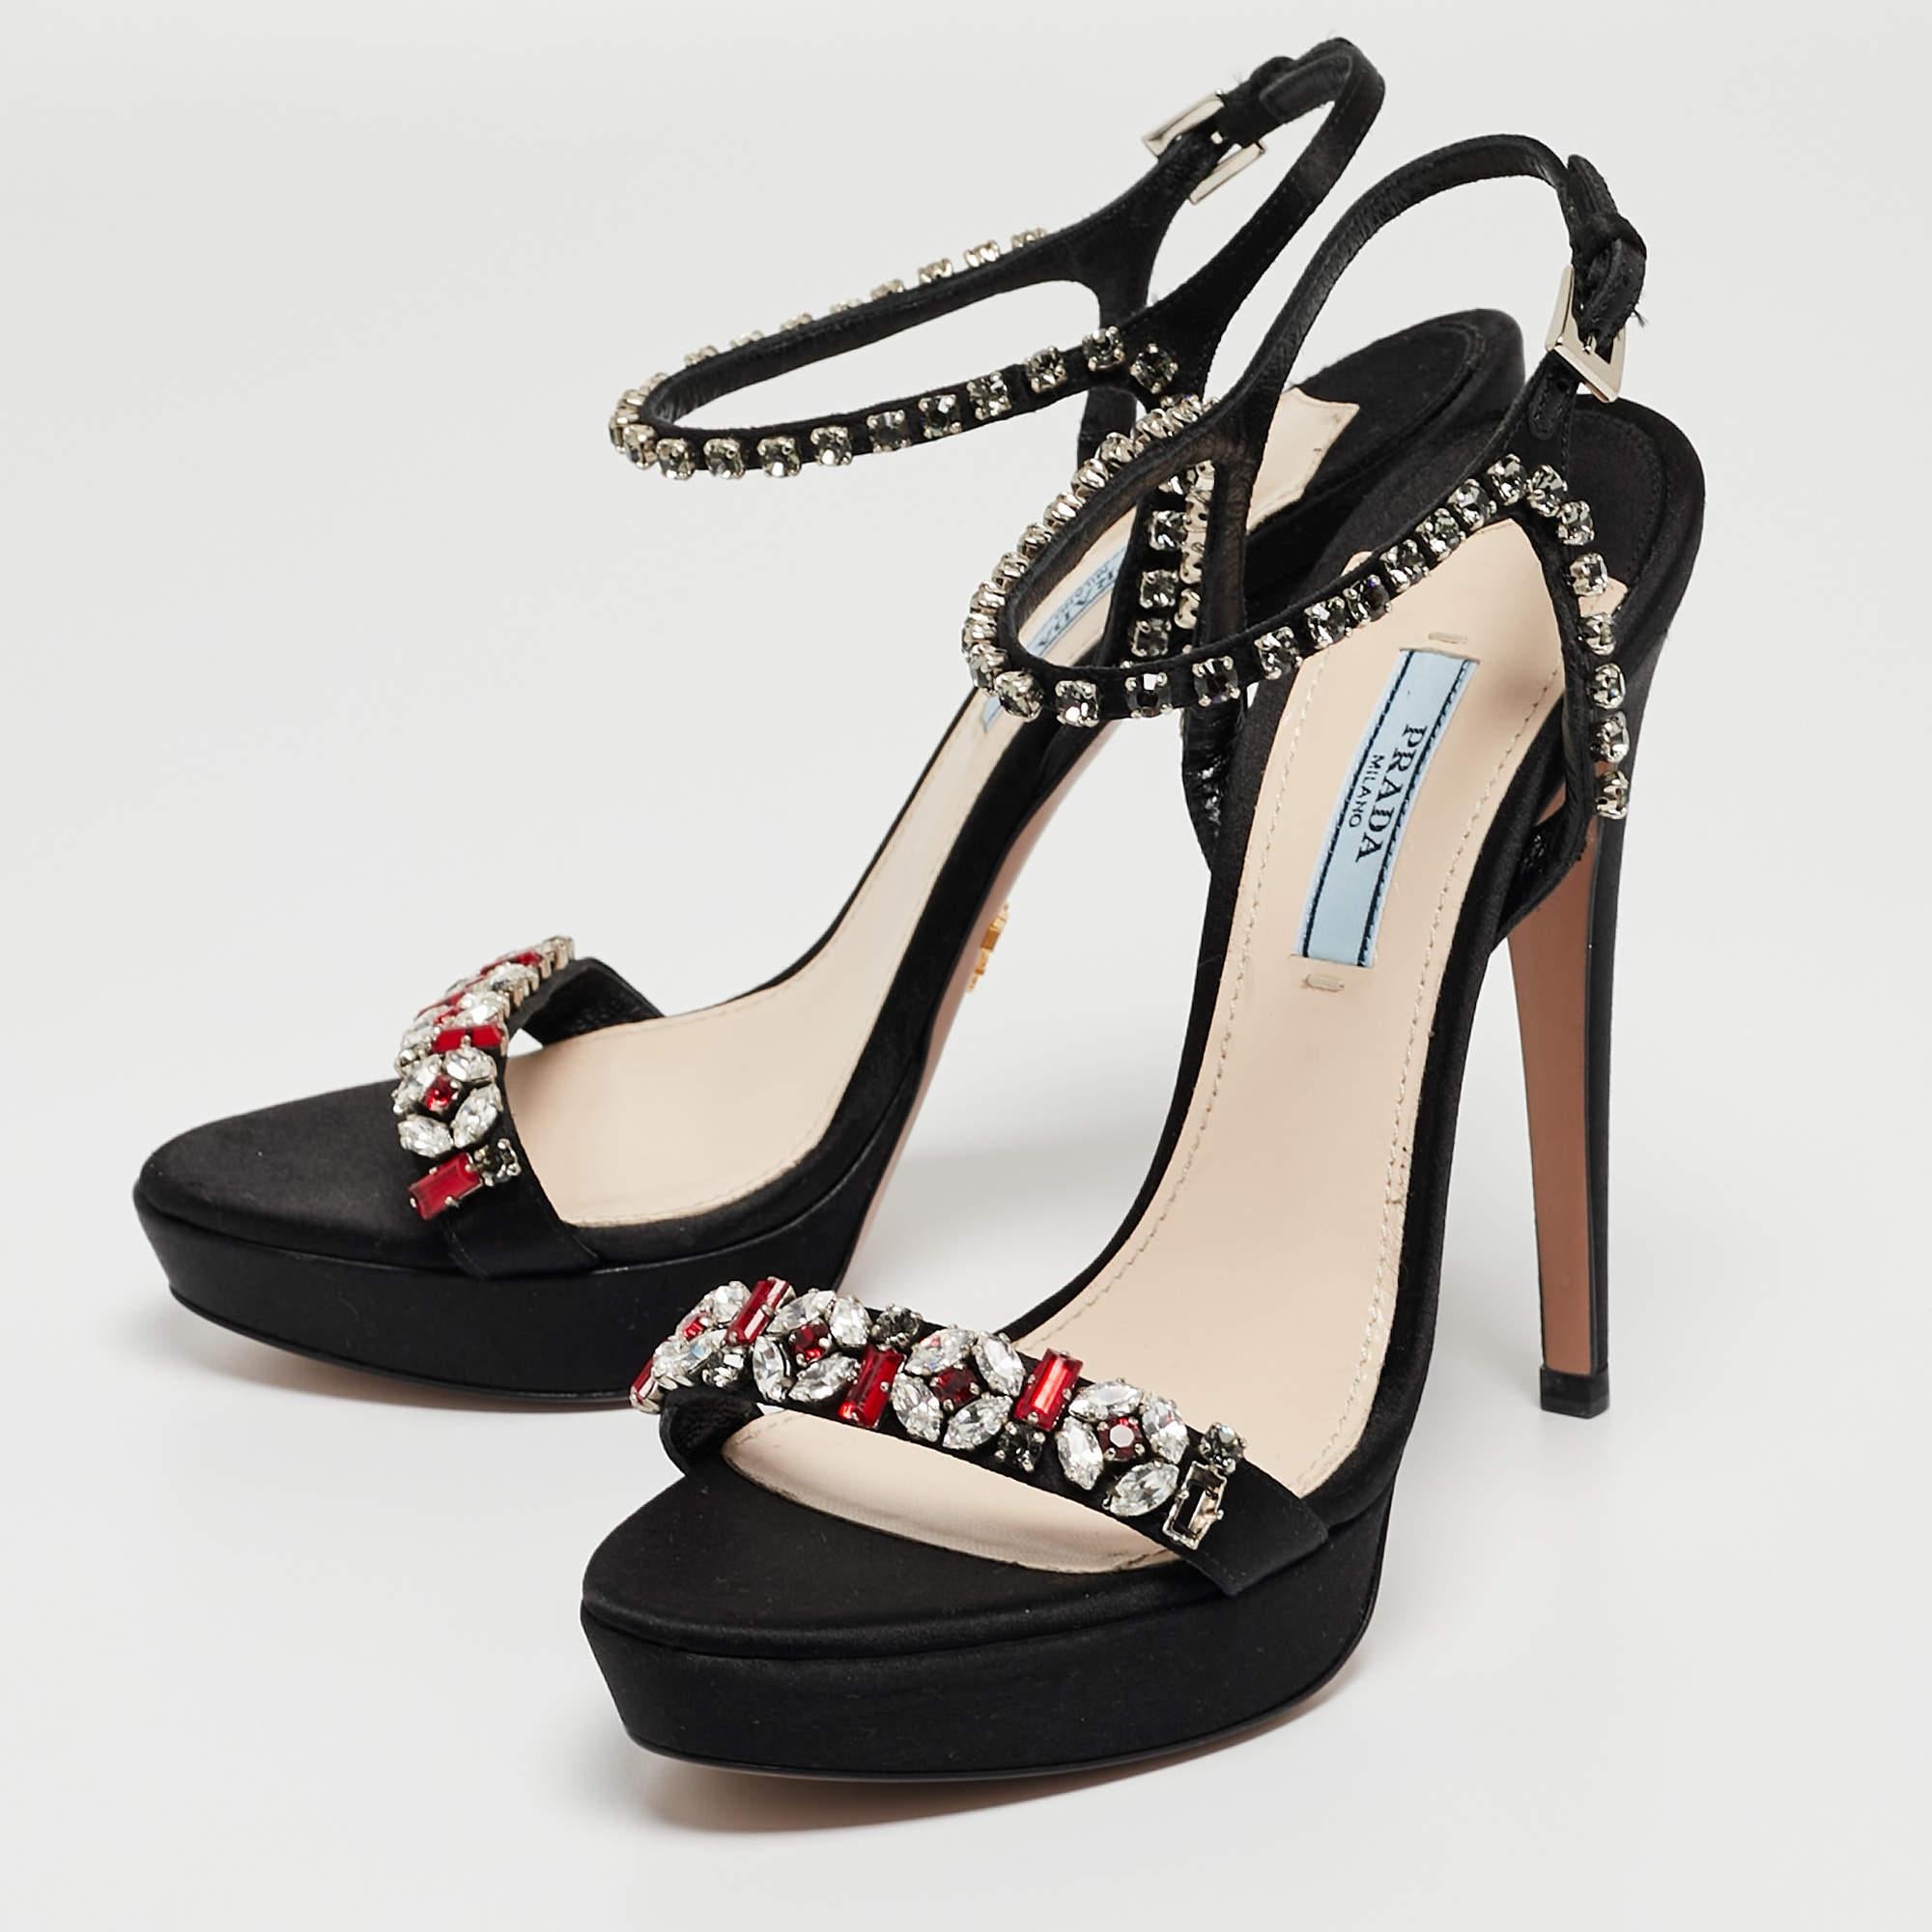 Complement your well-put-together outfit with these embellished sandals by Prada. Minimal and classy, they have an amazing construction for enduring quality and comfortable fit.

